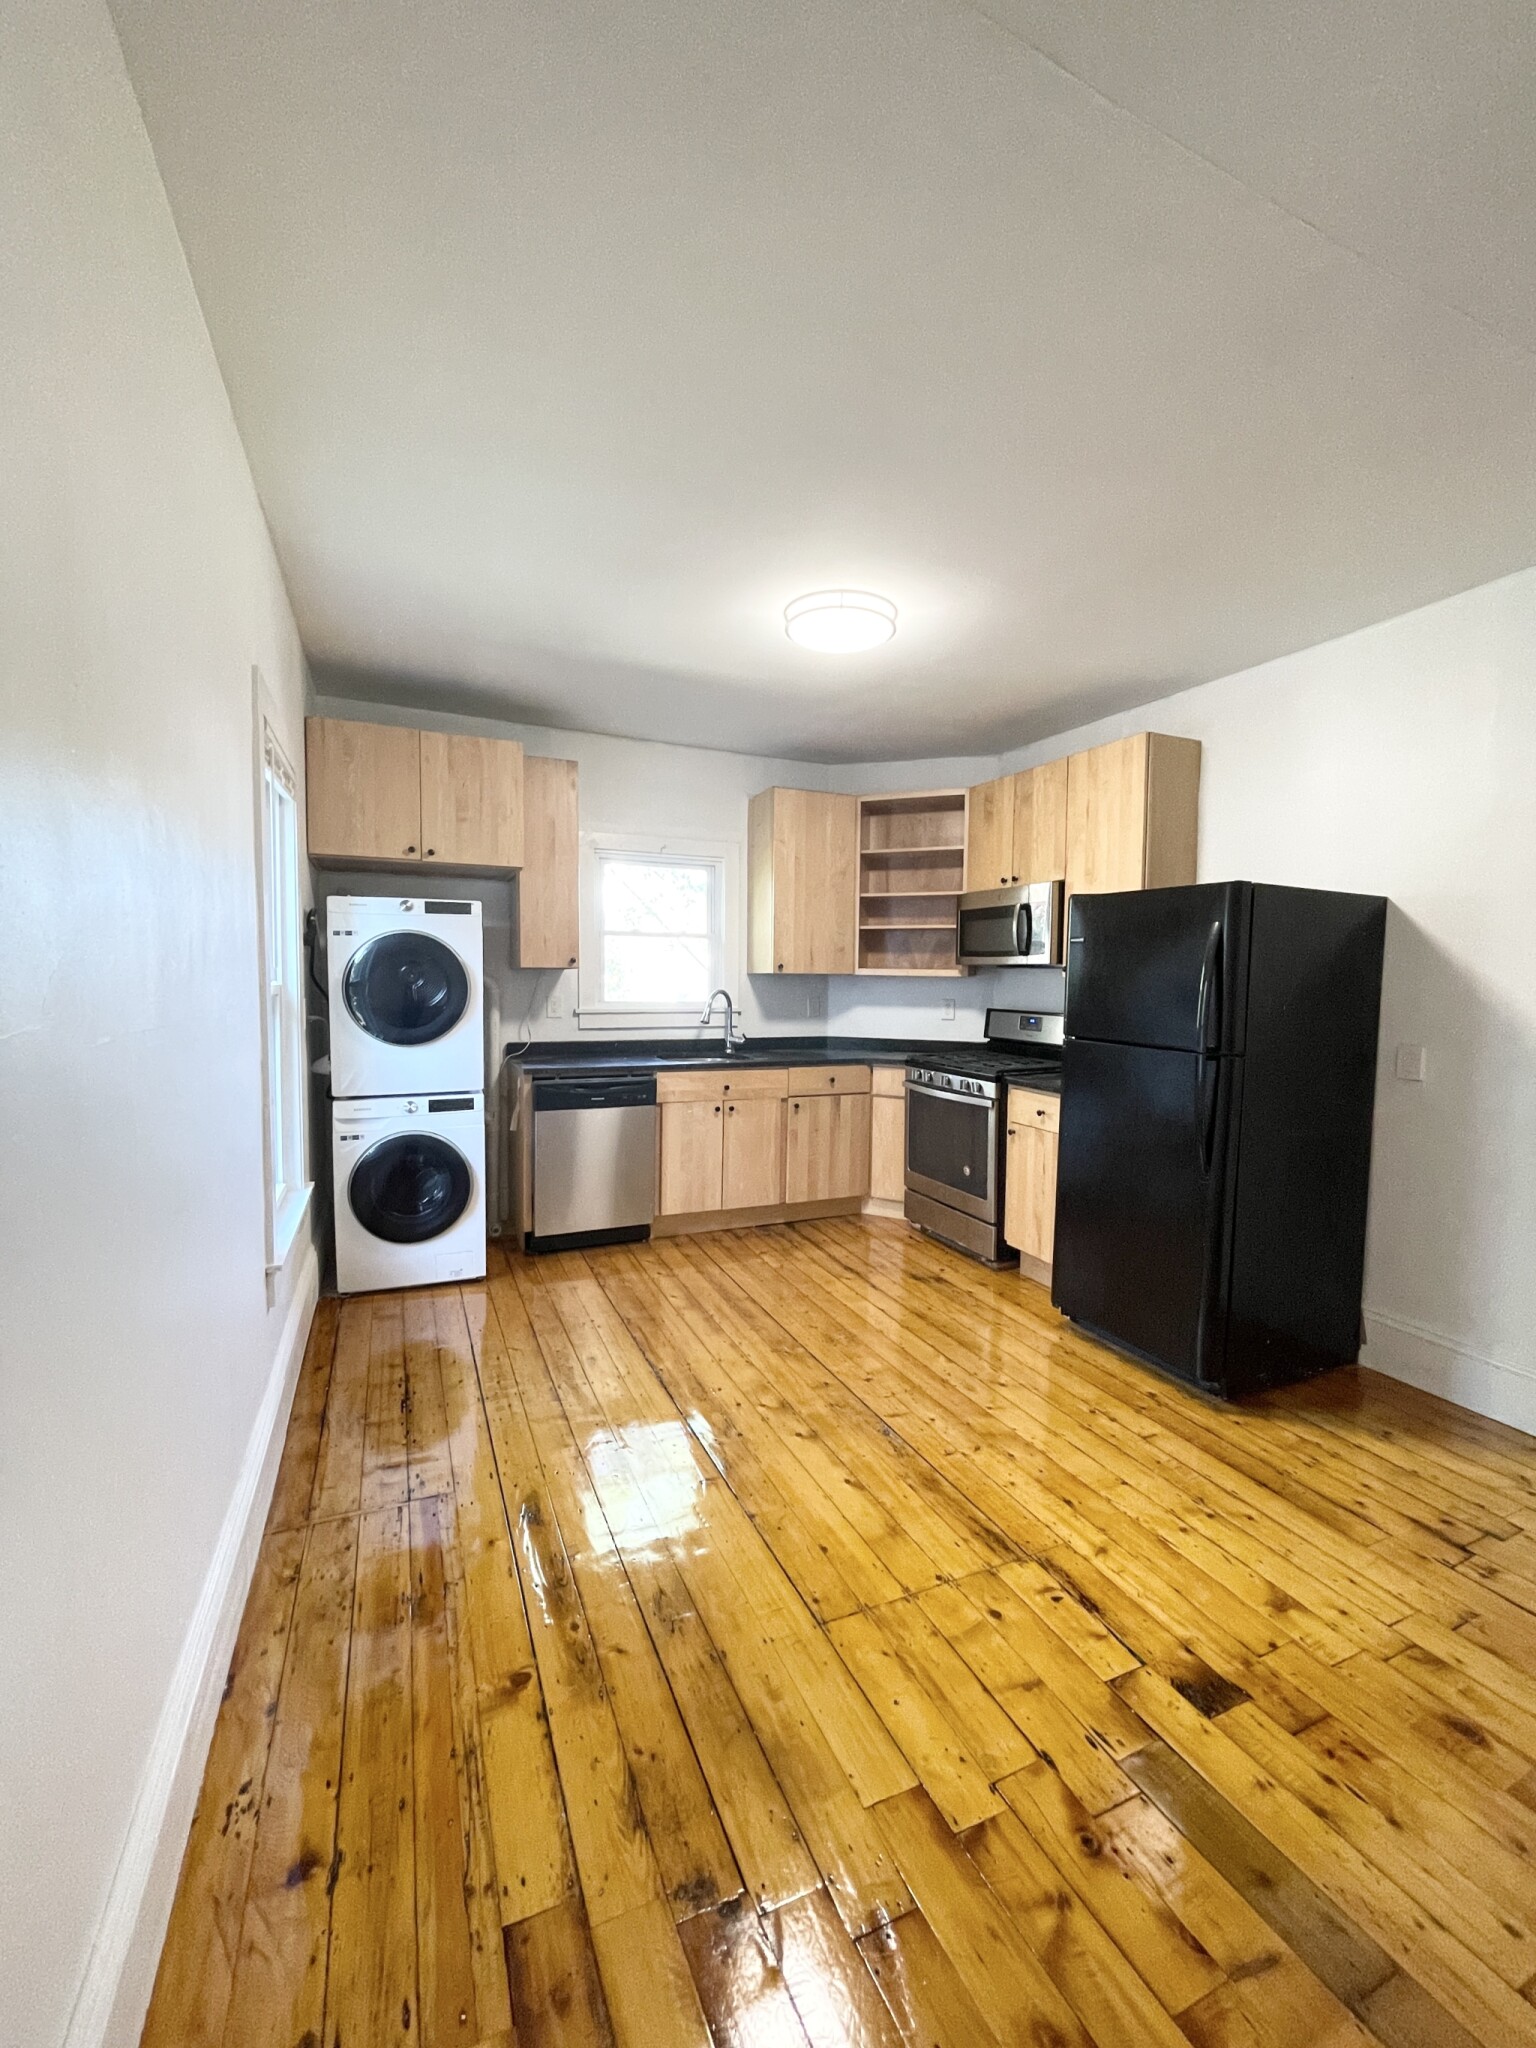 Photos of apartment on Oxford St.,Somerville MA 02143